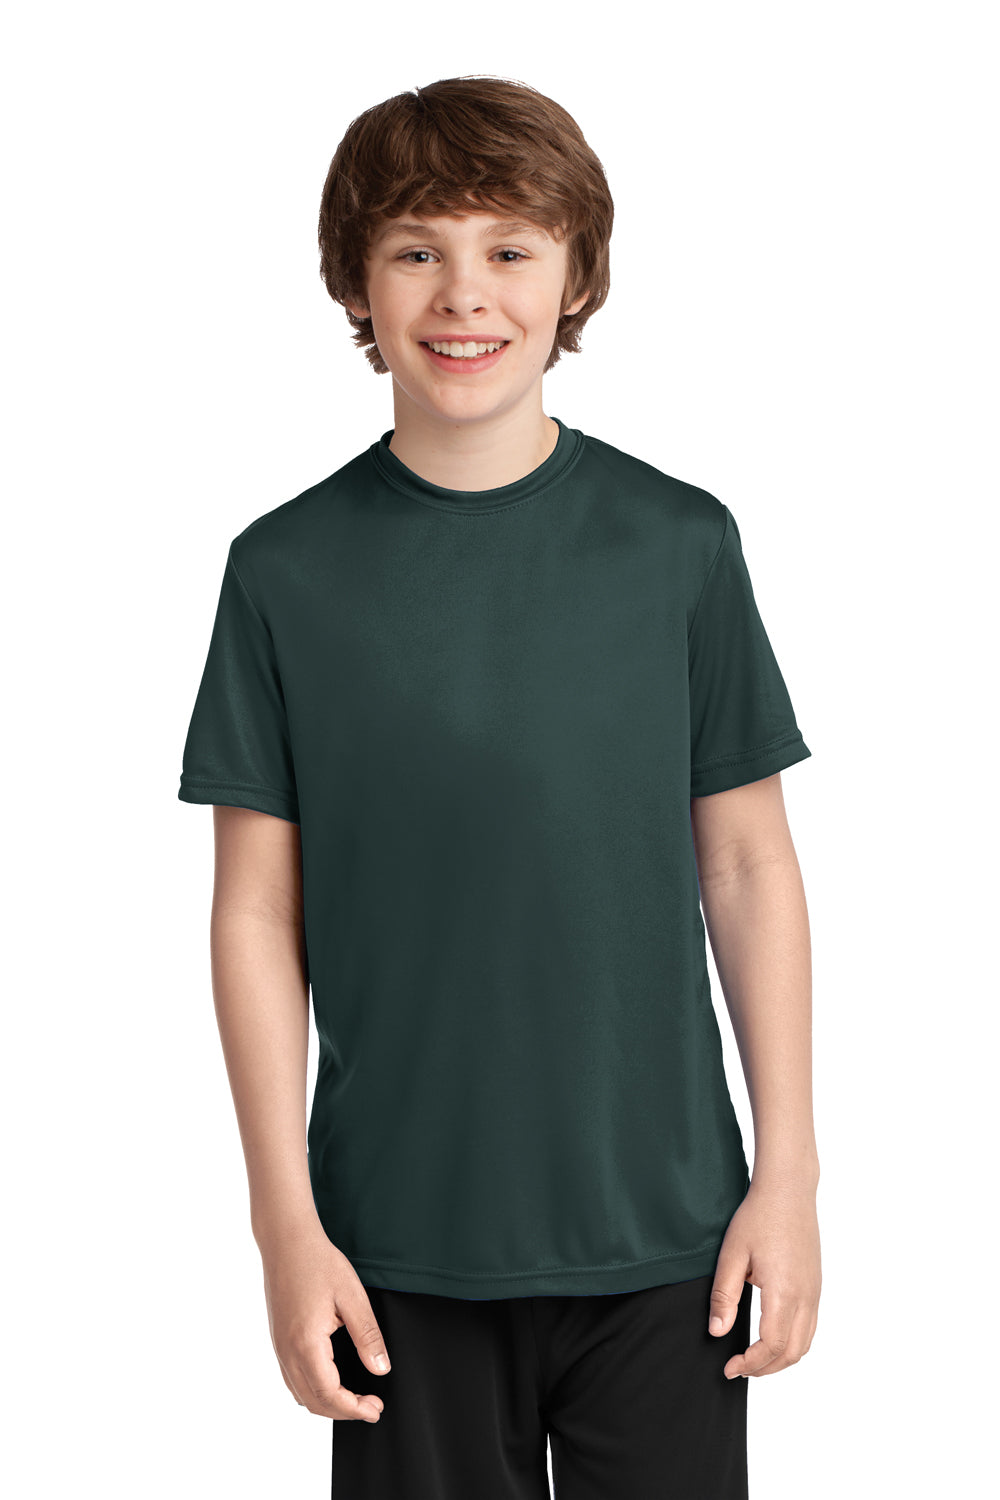 Port & Company PC380Y Youth Dry Zone Performance Moisture Wicking Short Sleeve Crewneck T-Shirt Dark Green Front